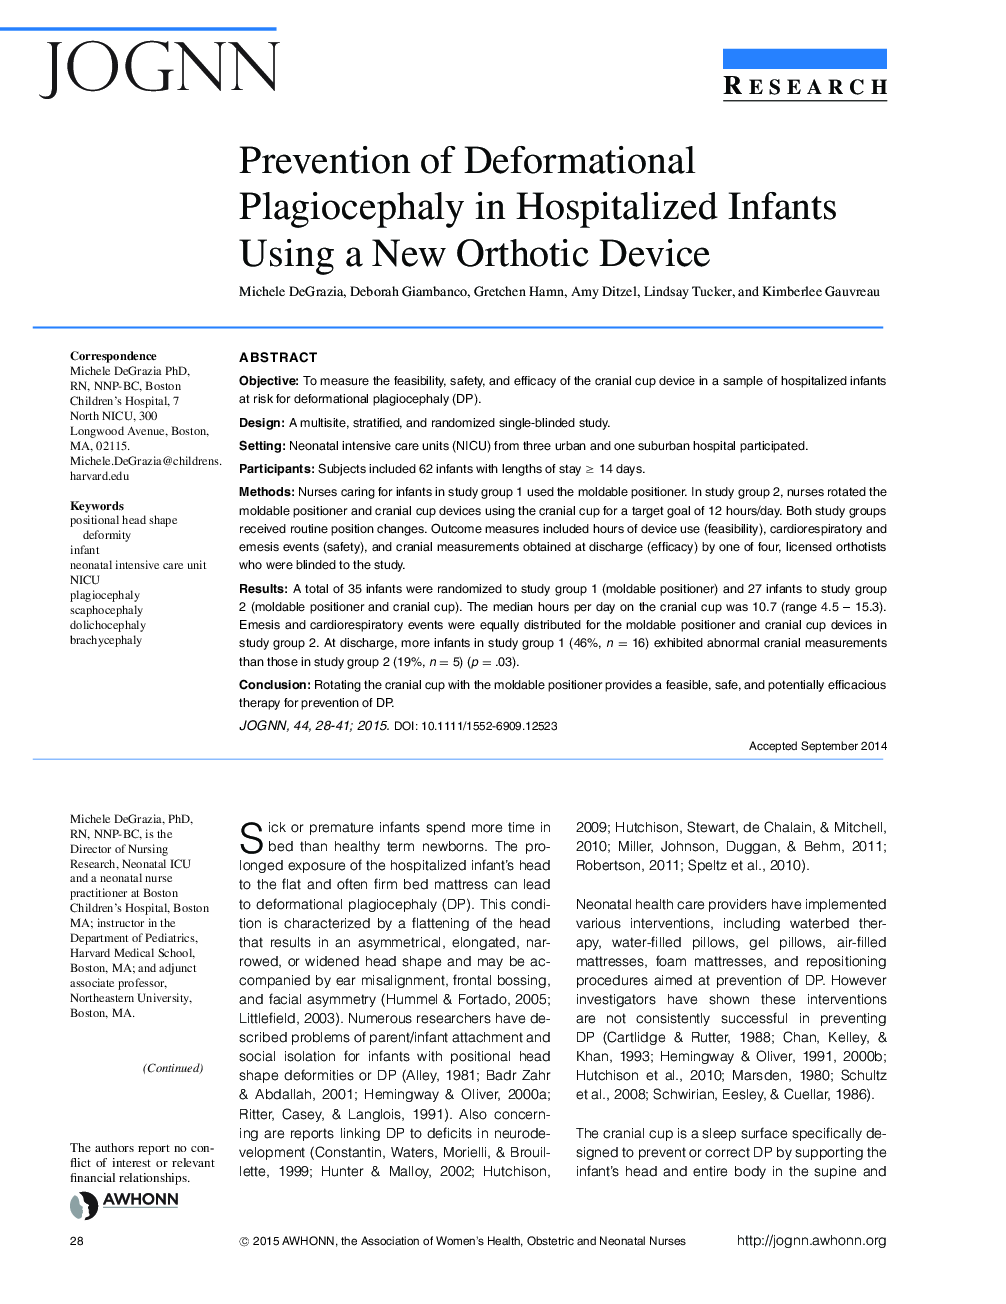 Prevention of Deformational Plagiocephaly in Hospitalized Infants Using a New Orthotic Device